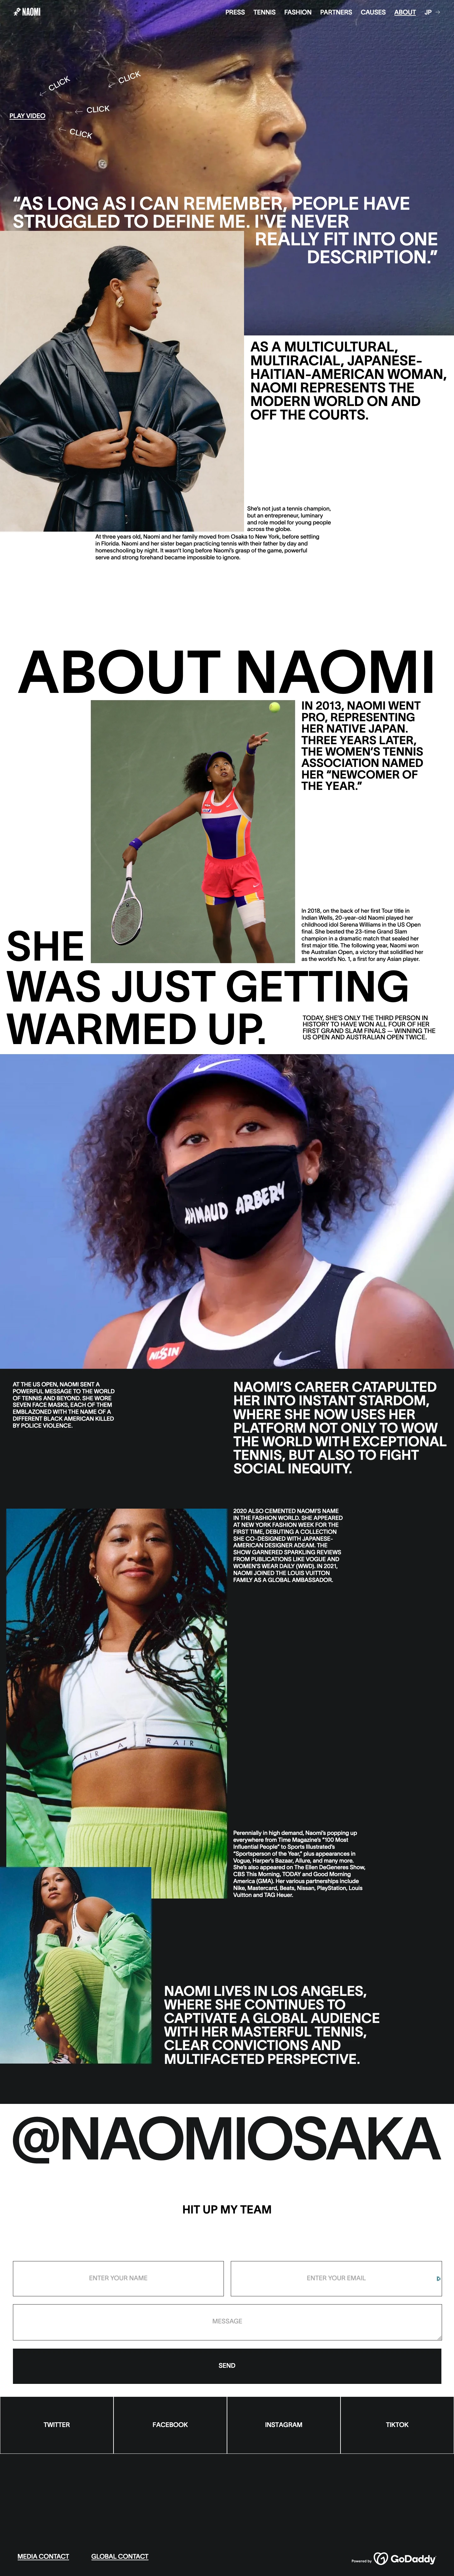 Naomi Osaka Landing Page Example: Four-time Grand Slam champion and first Asian player to hold the No. 1 ranking, with her massive serve and fearless determination, Naomi’s poised to become one of the game’s all-time greats.